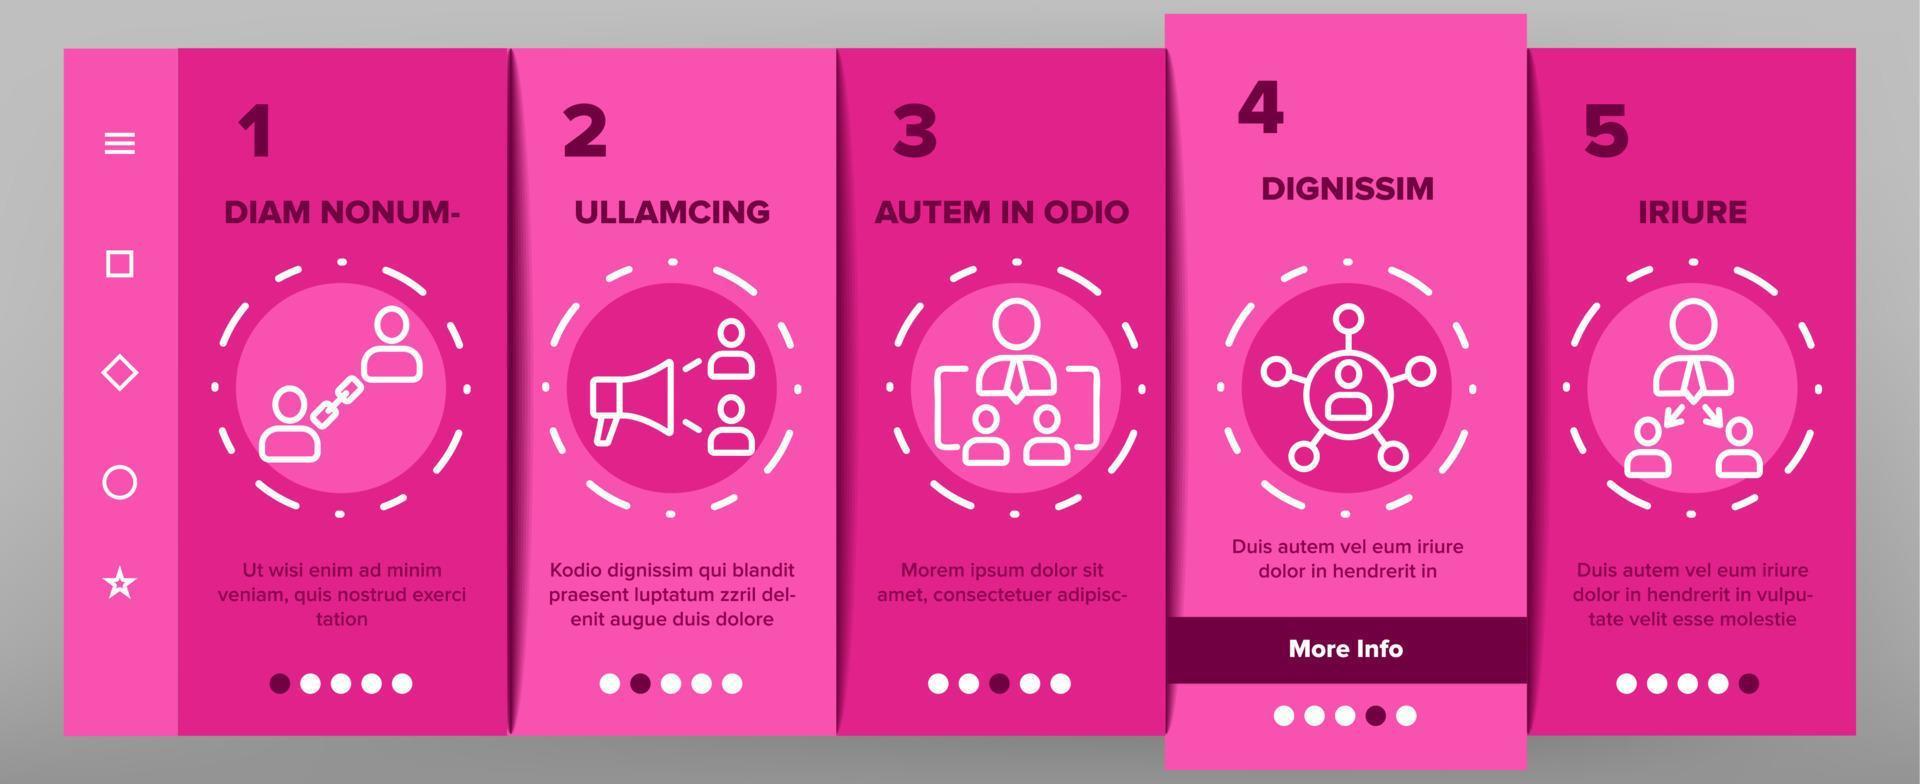 Referral Marketing Onboarding Icons Set Vector